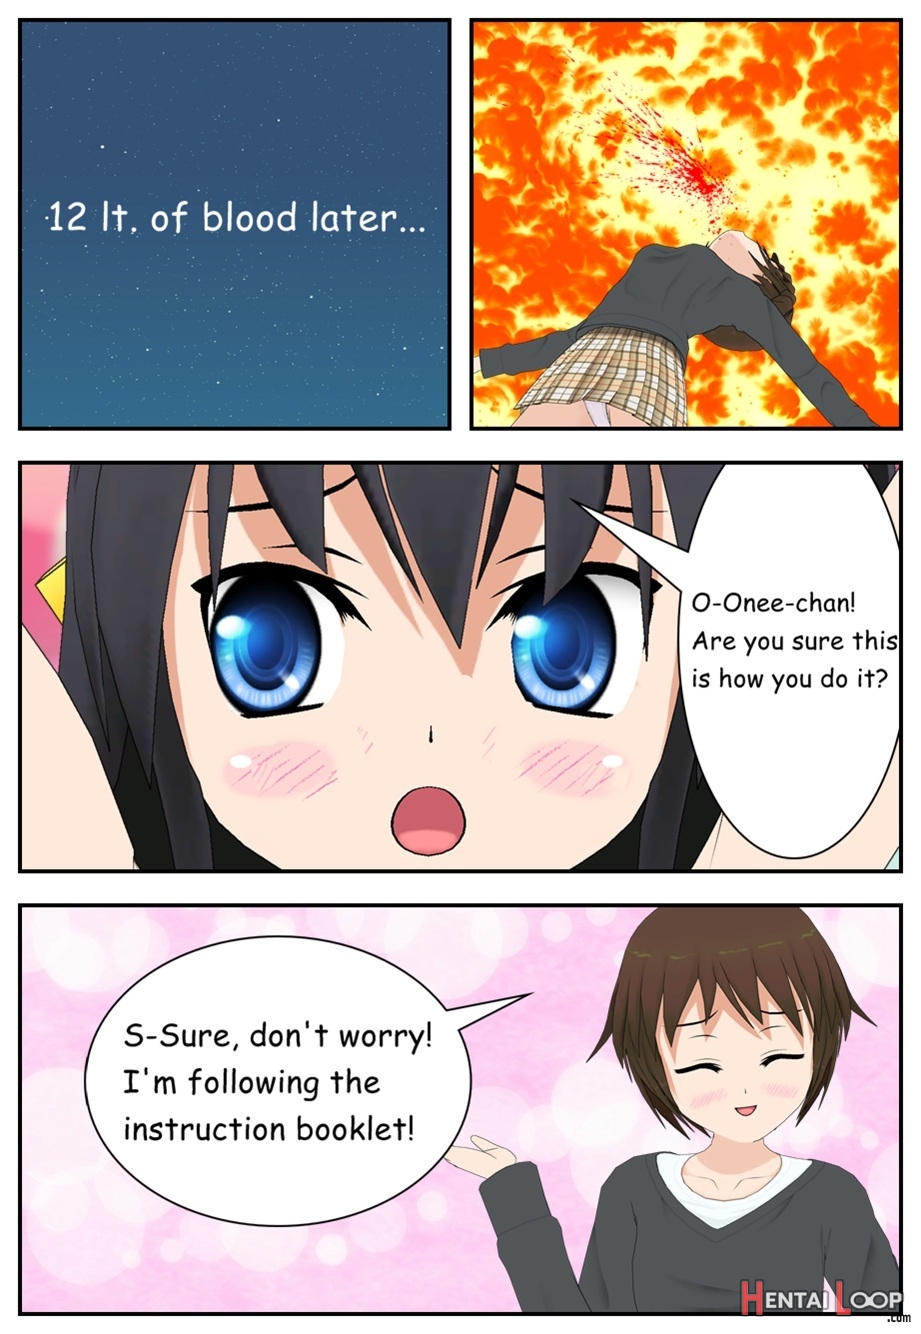 Onee-chan Is A Perv! page 8